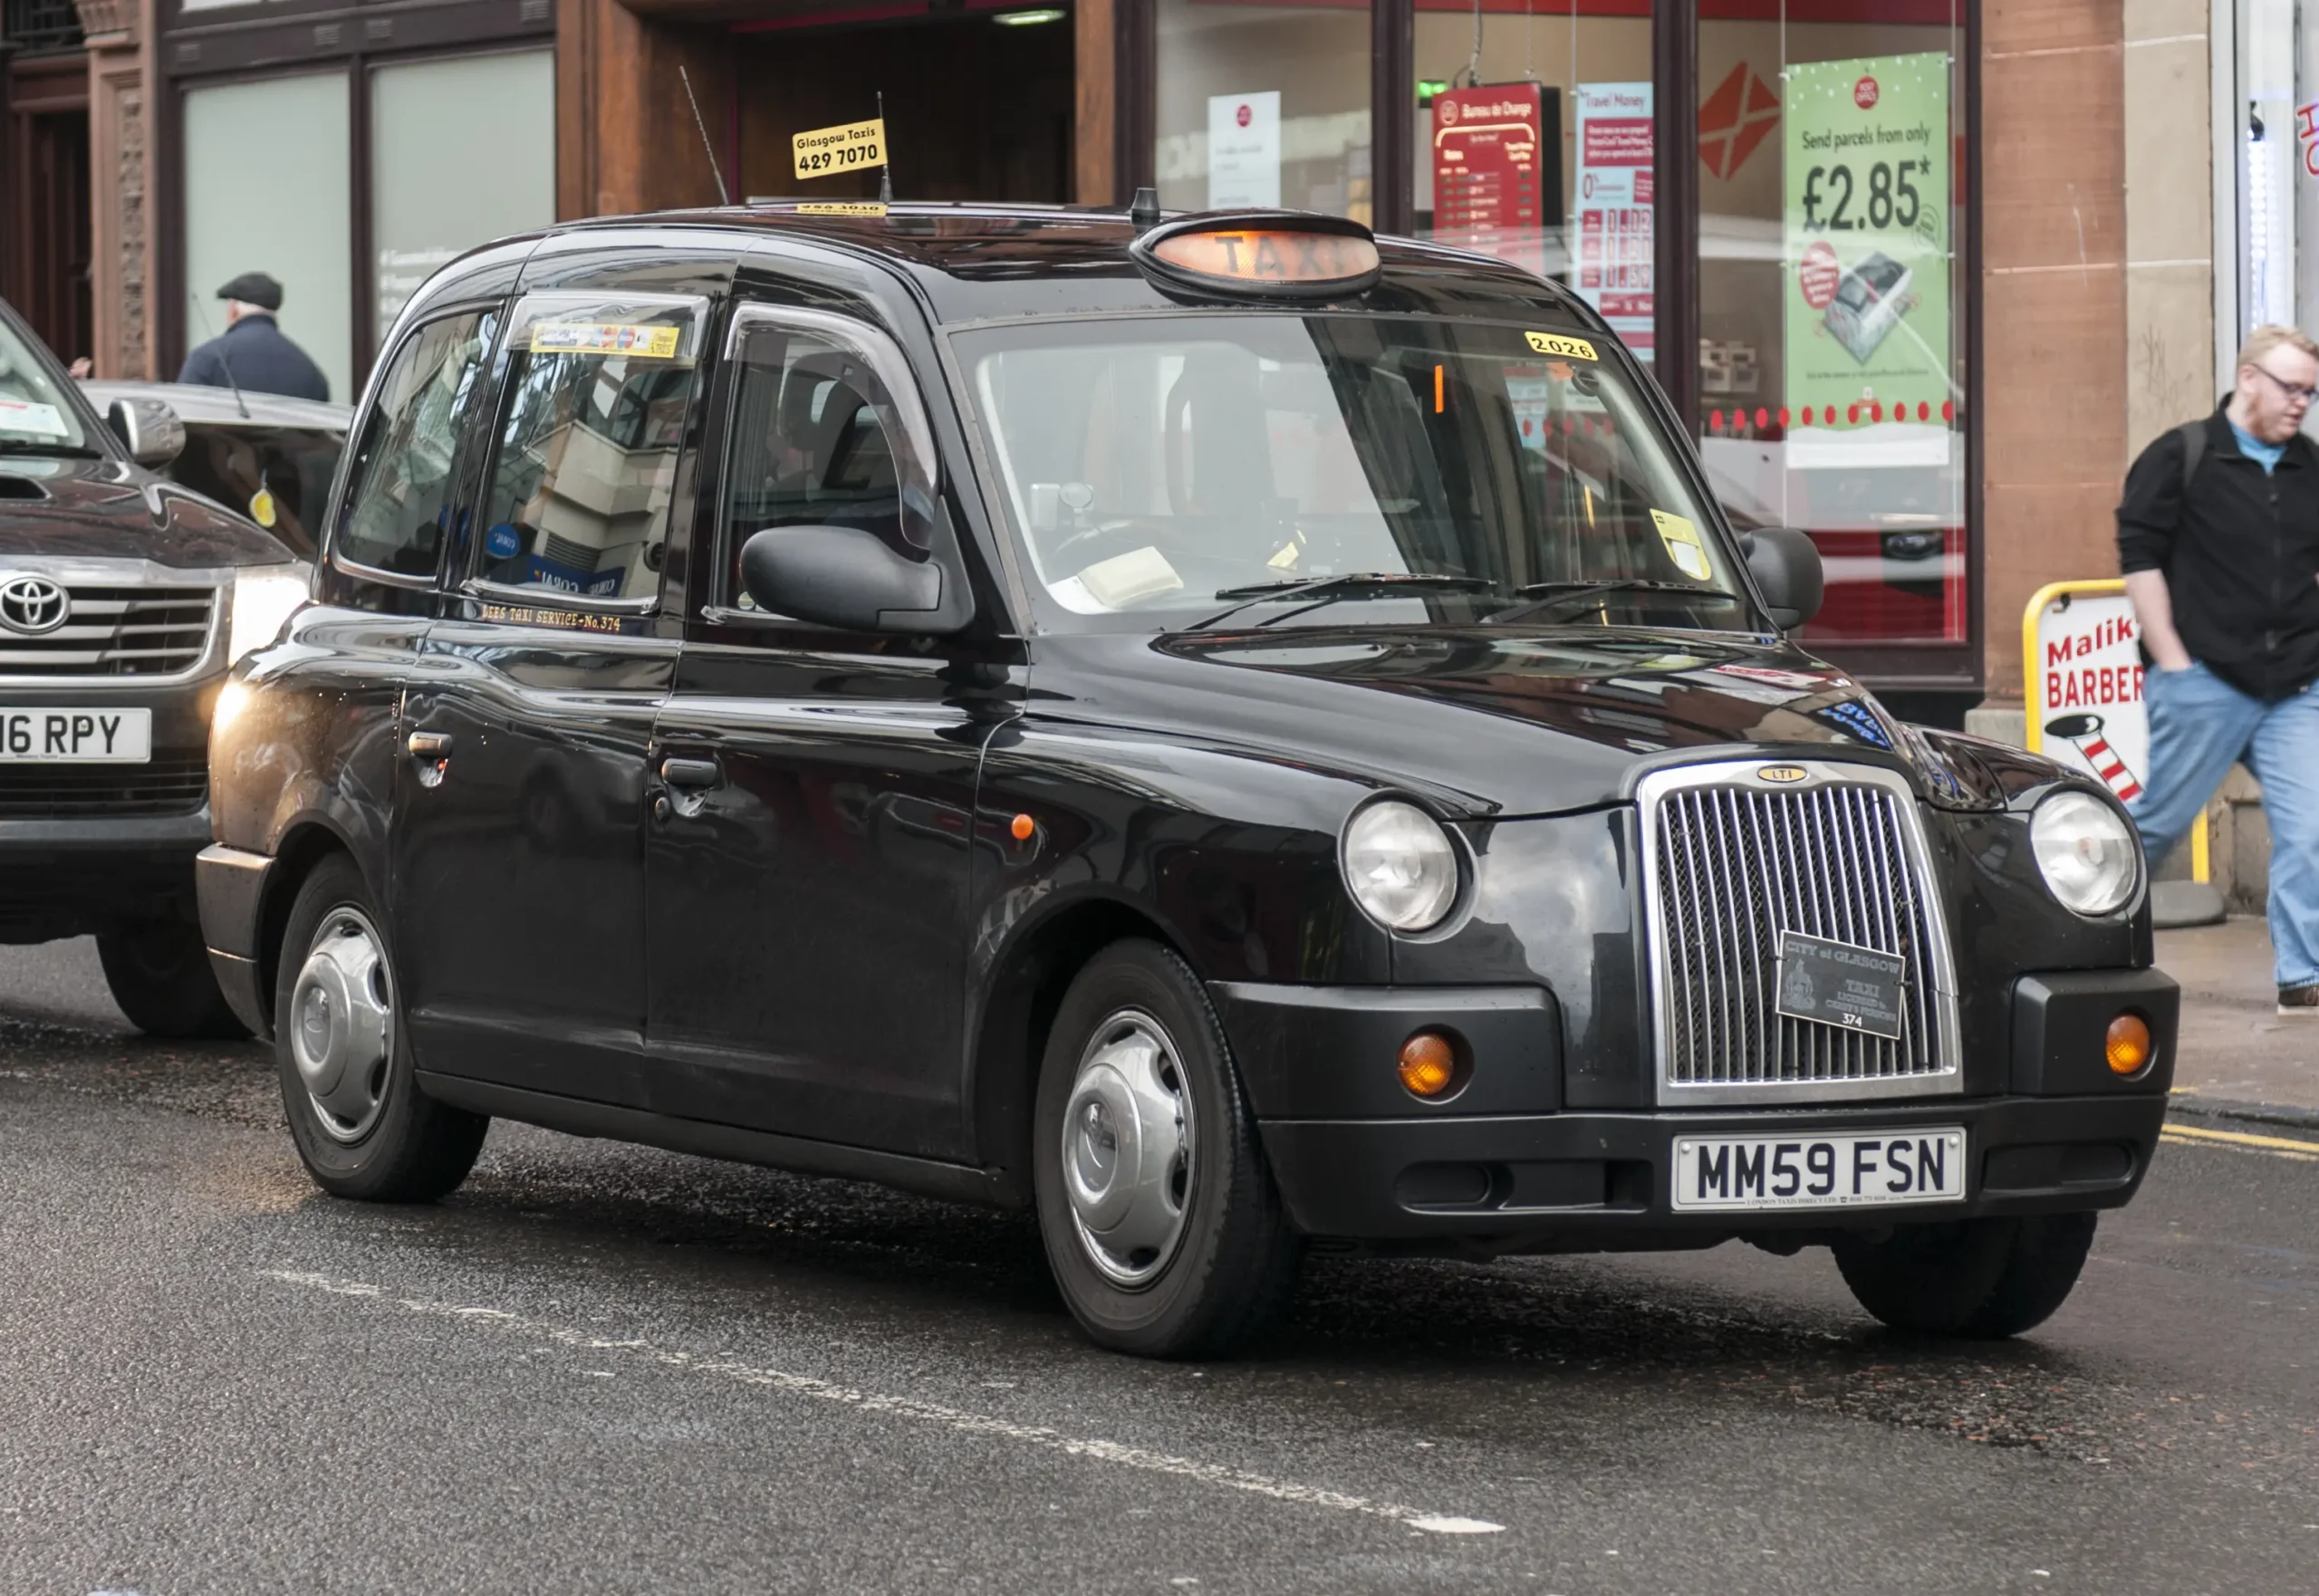 licensed london taxi - Can you buy a London taxi for personal use